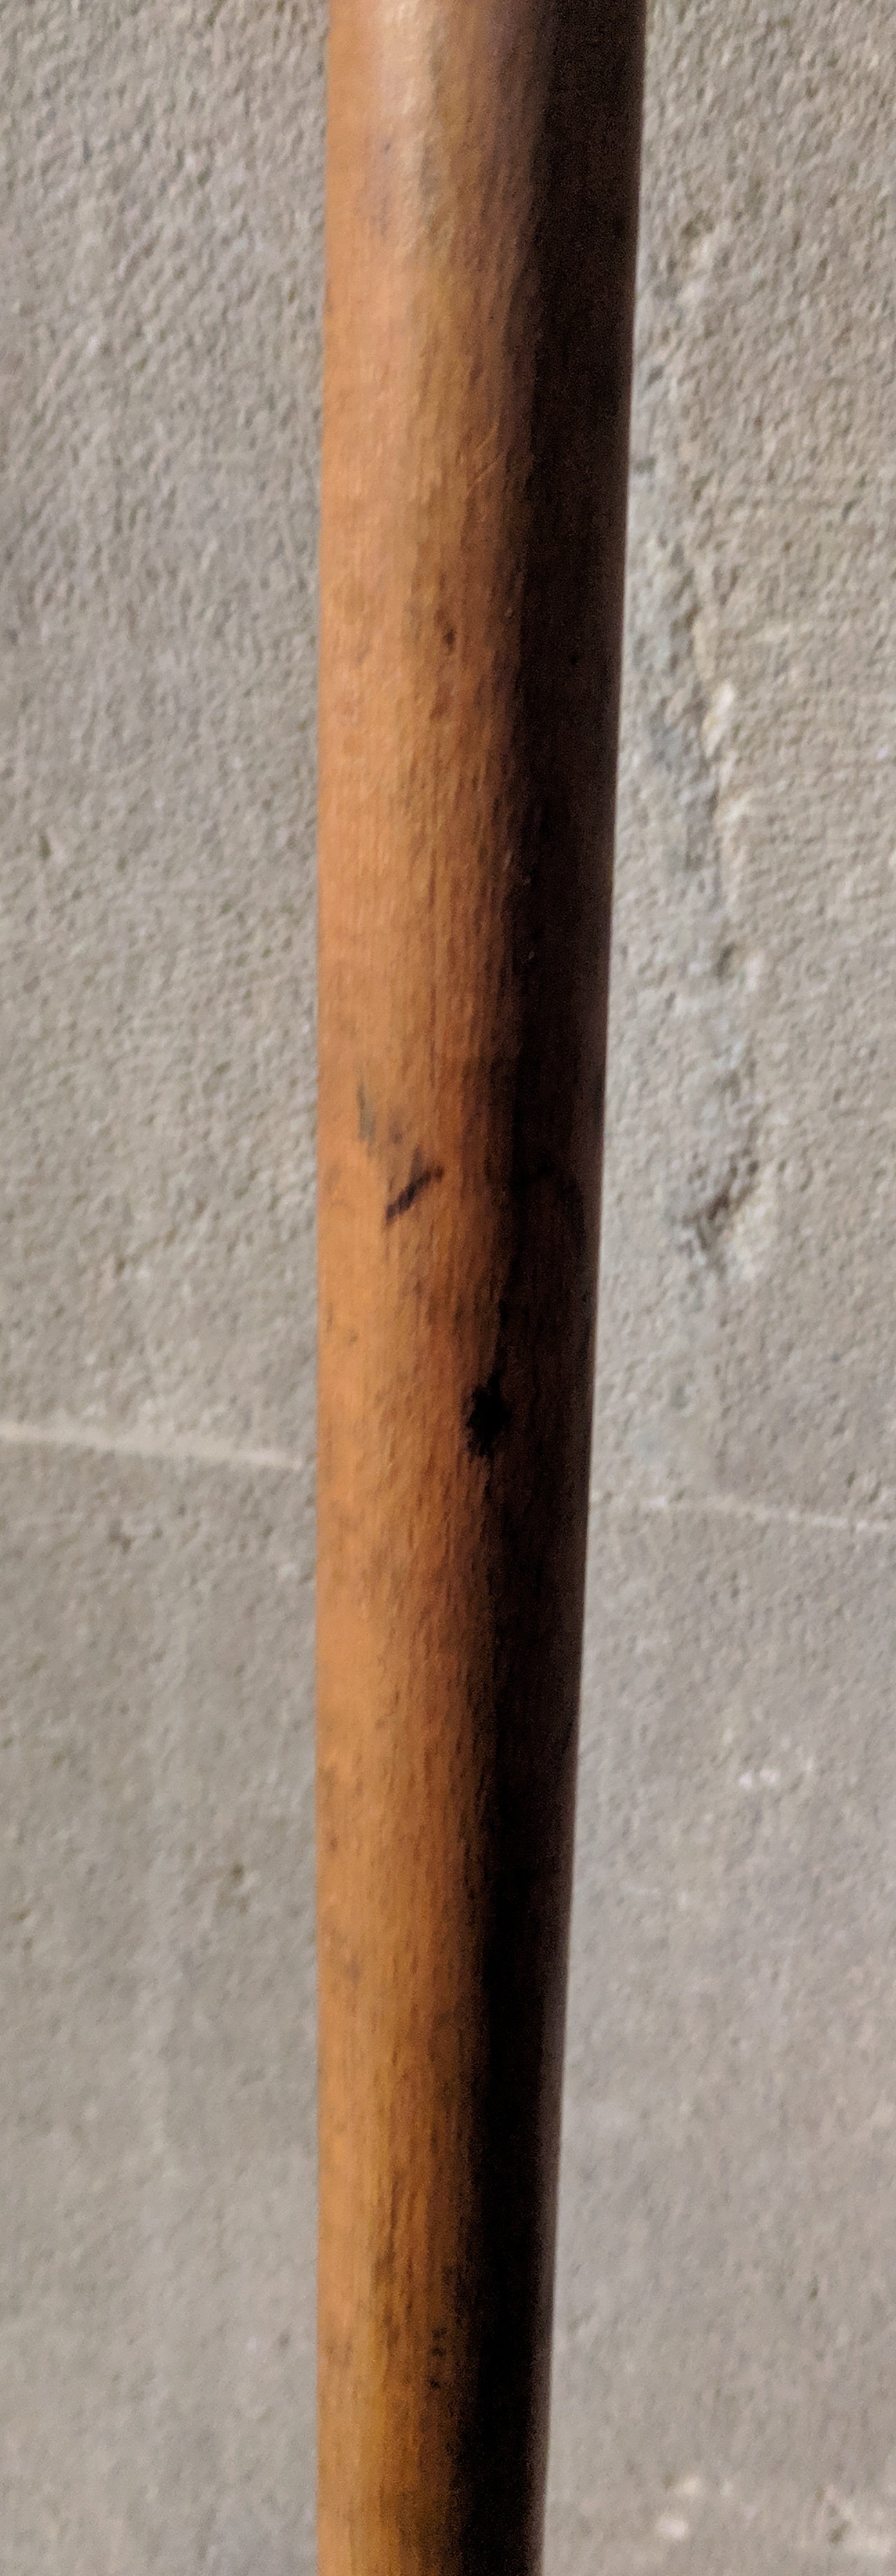 Vintage Shooting Stick with Cane Seat